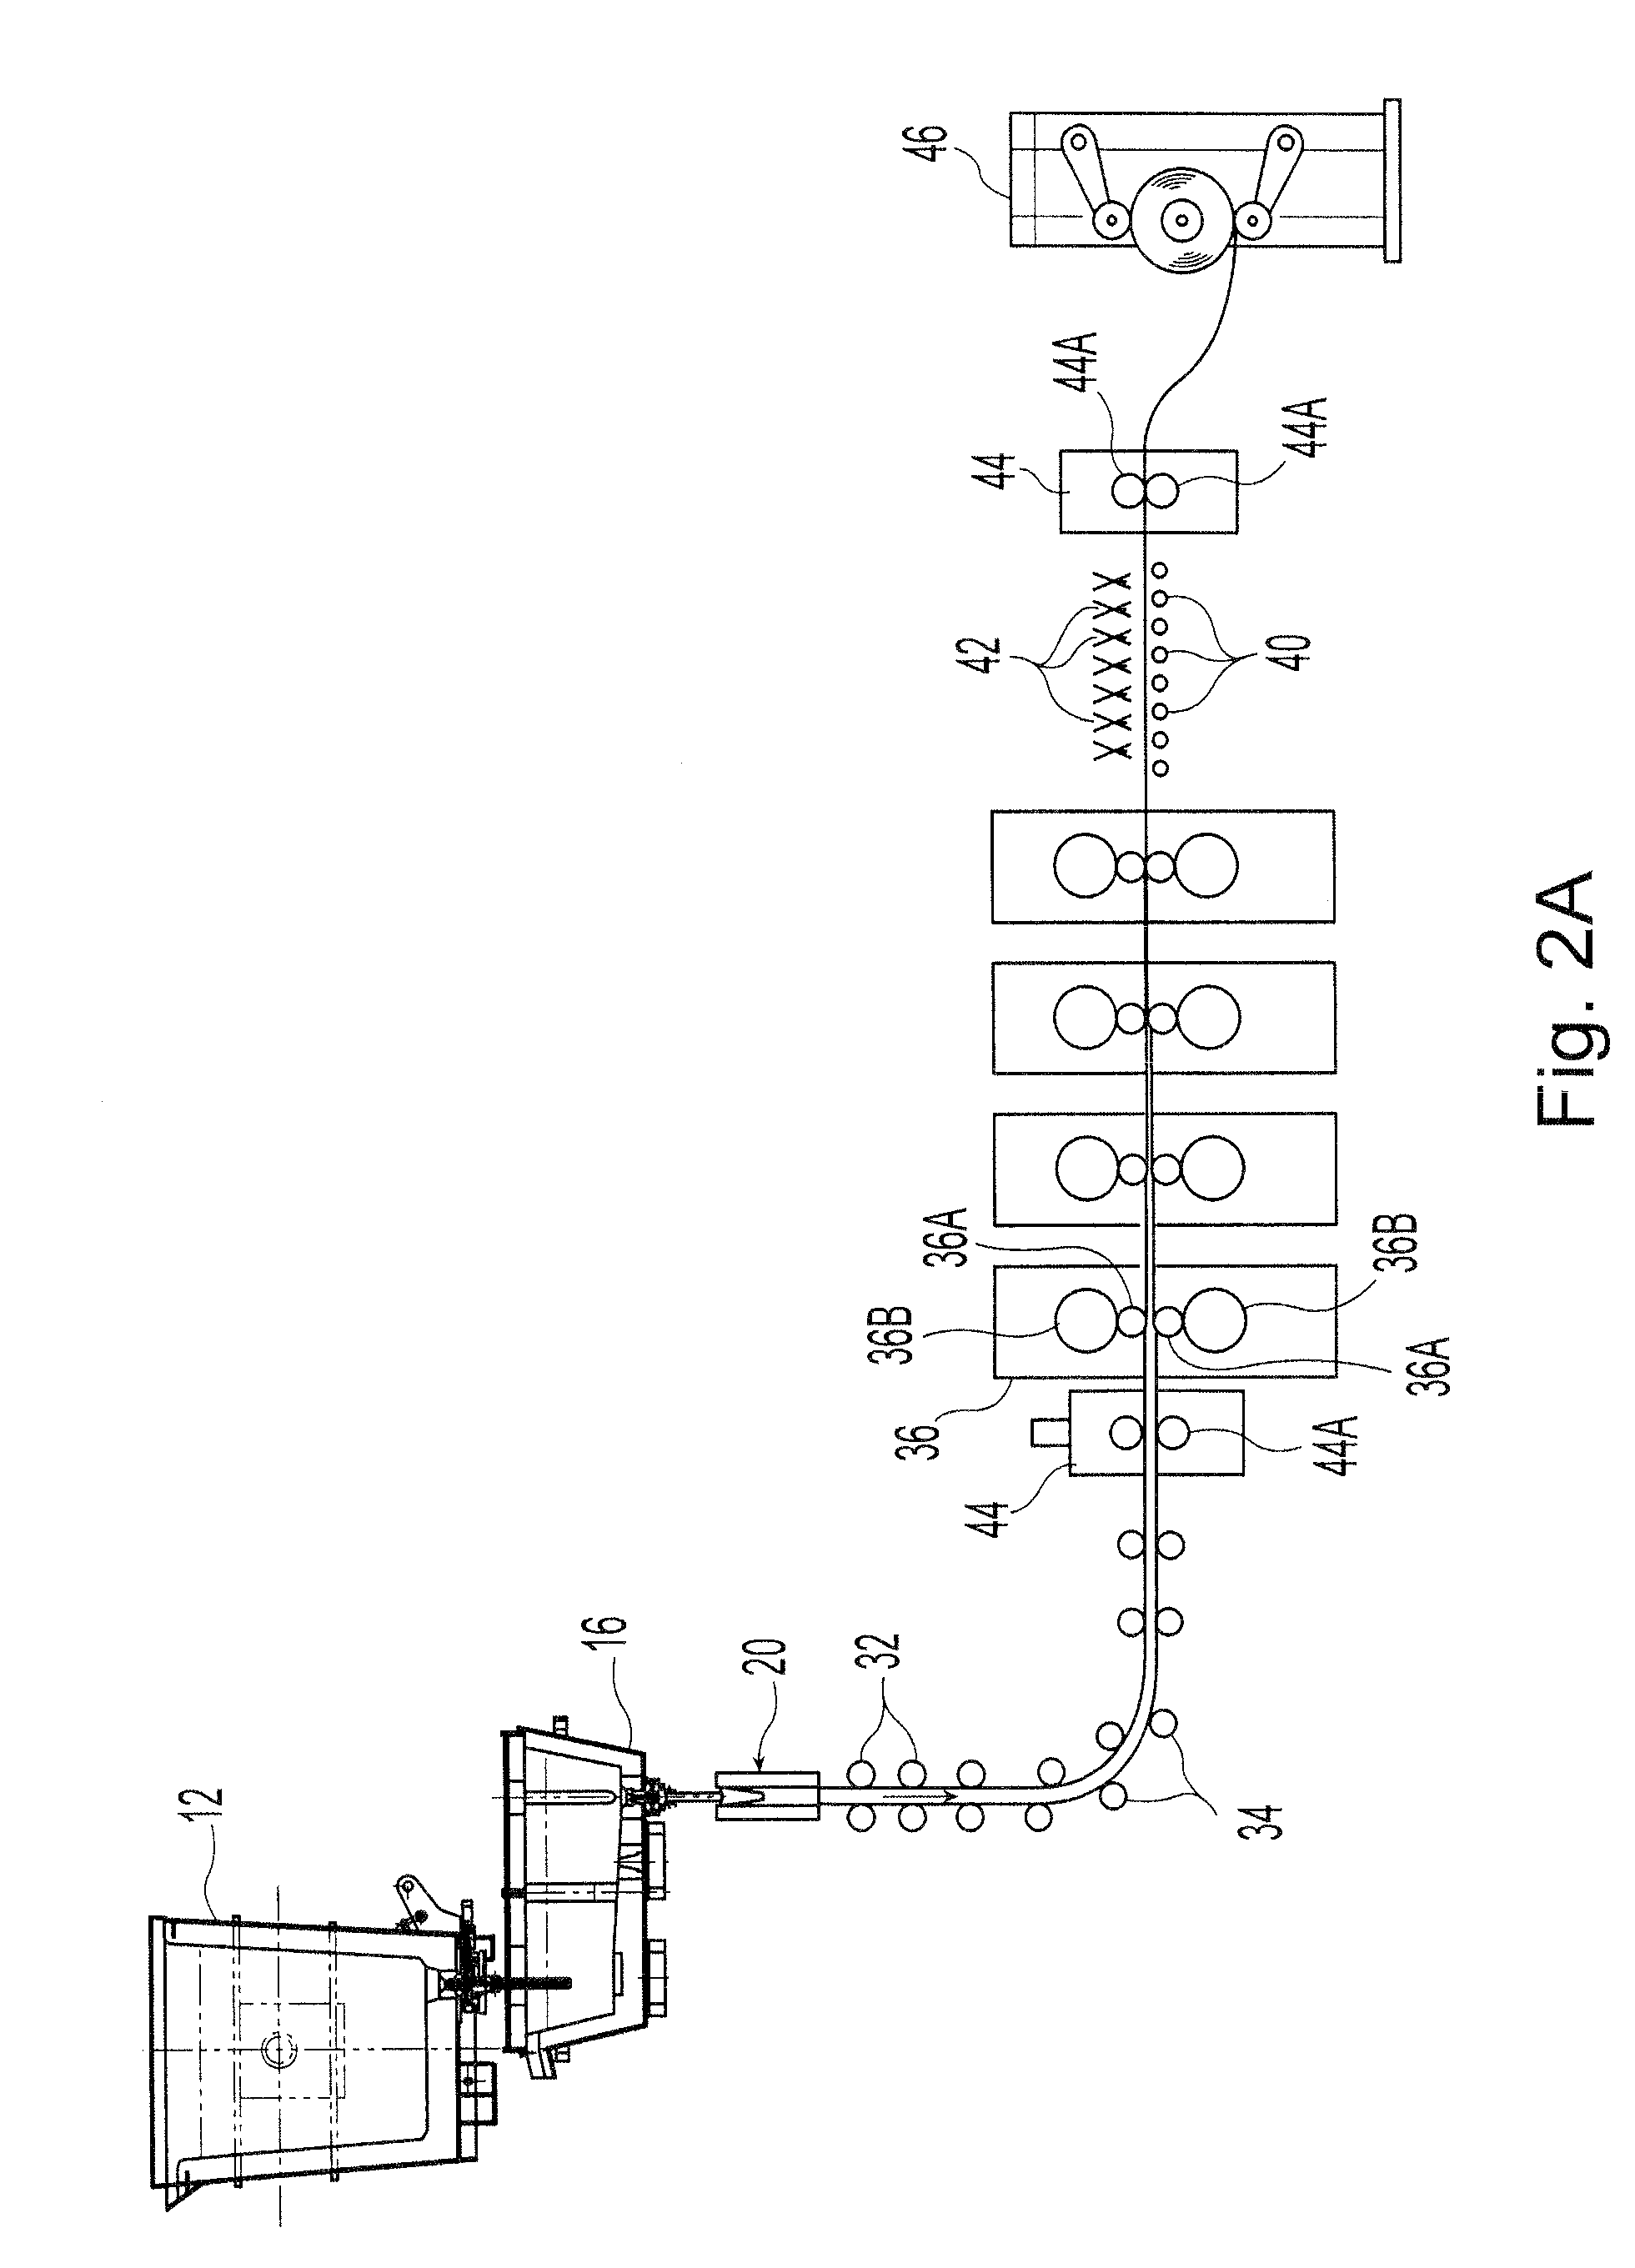 Complex metallographic structured steel and method of manufacturing same